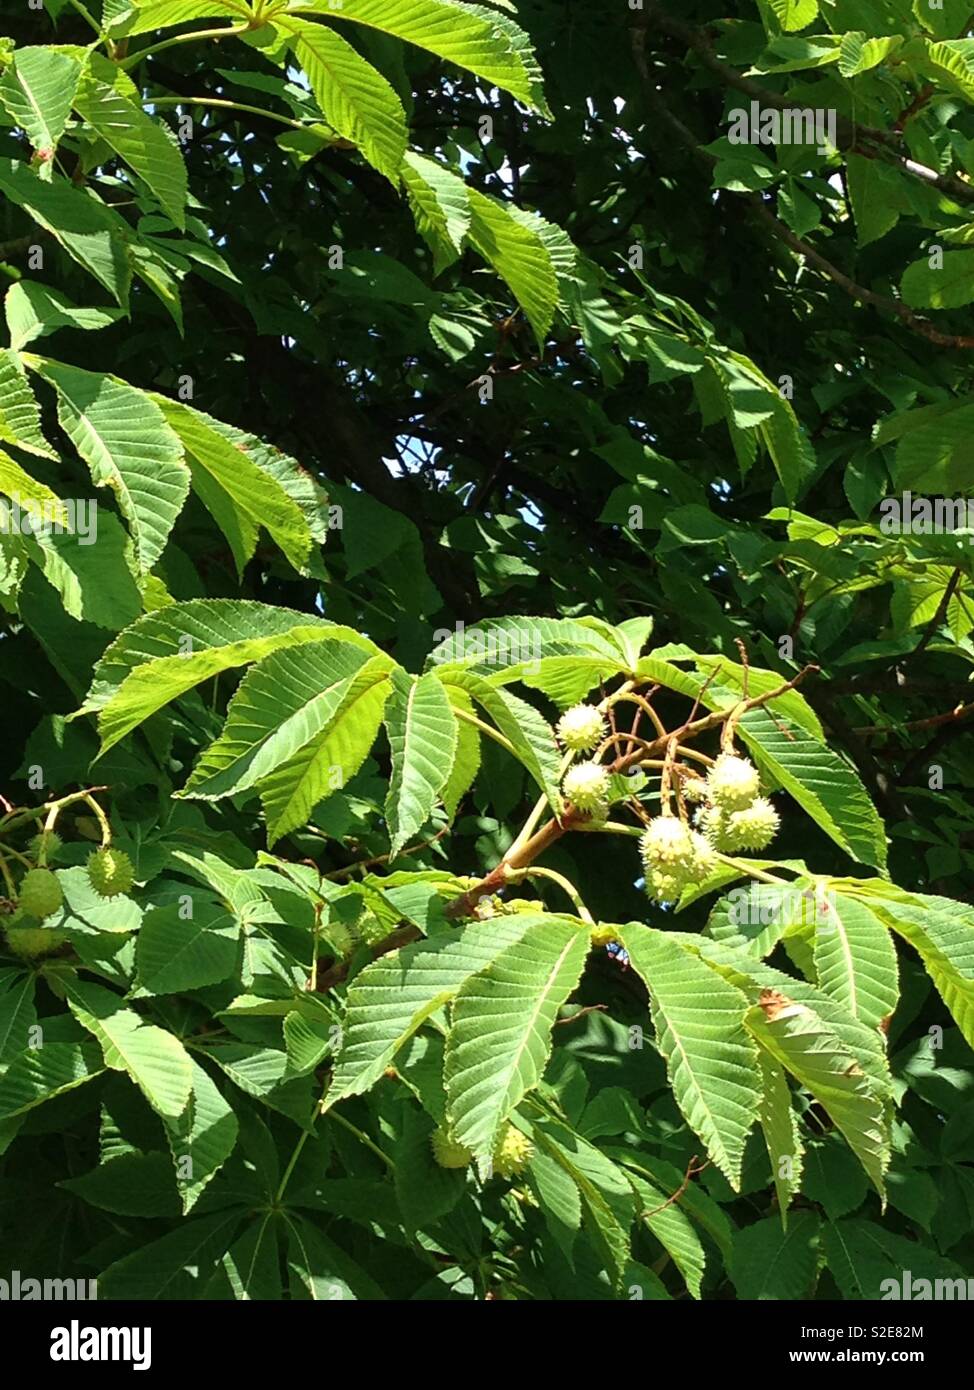 Chestnut tree, with leaf and spiky fruit shell detail, green foliage in sunlight Stock Photo